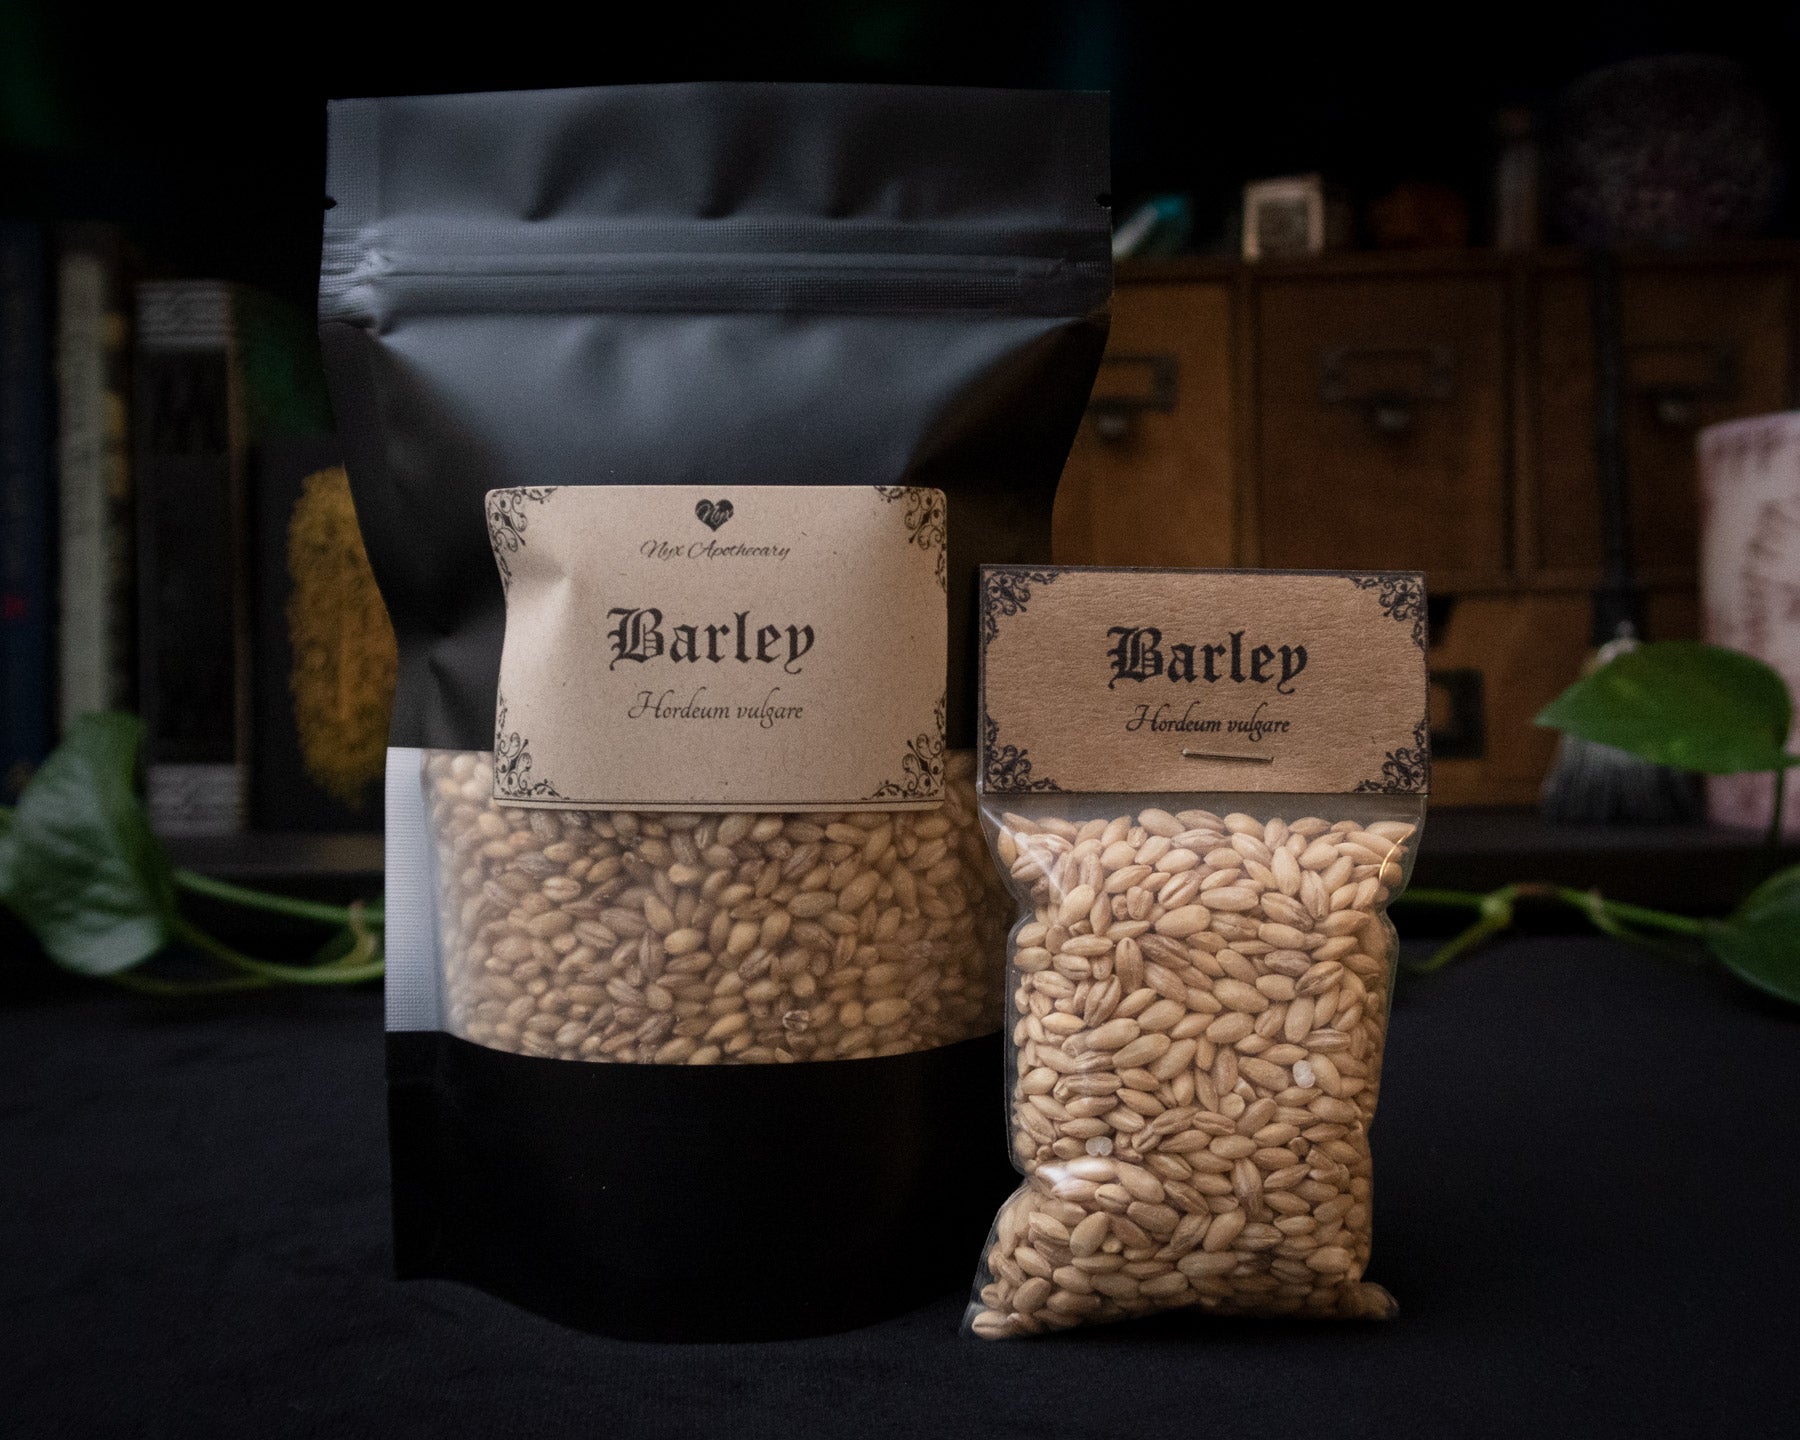 A large and small bag of barley